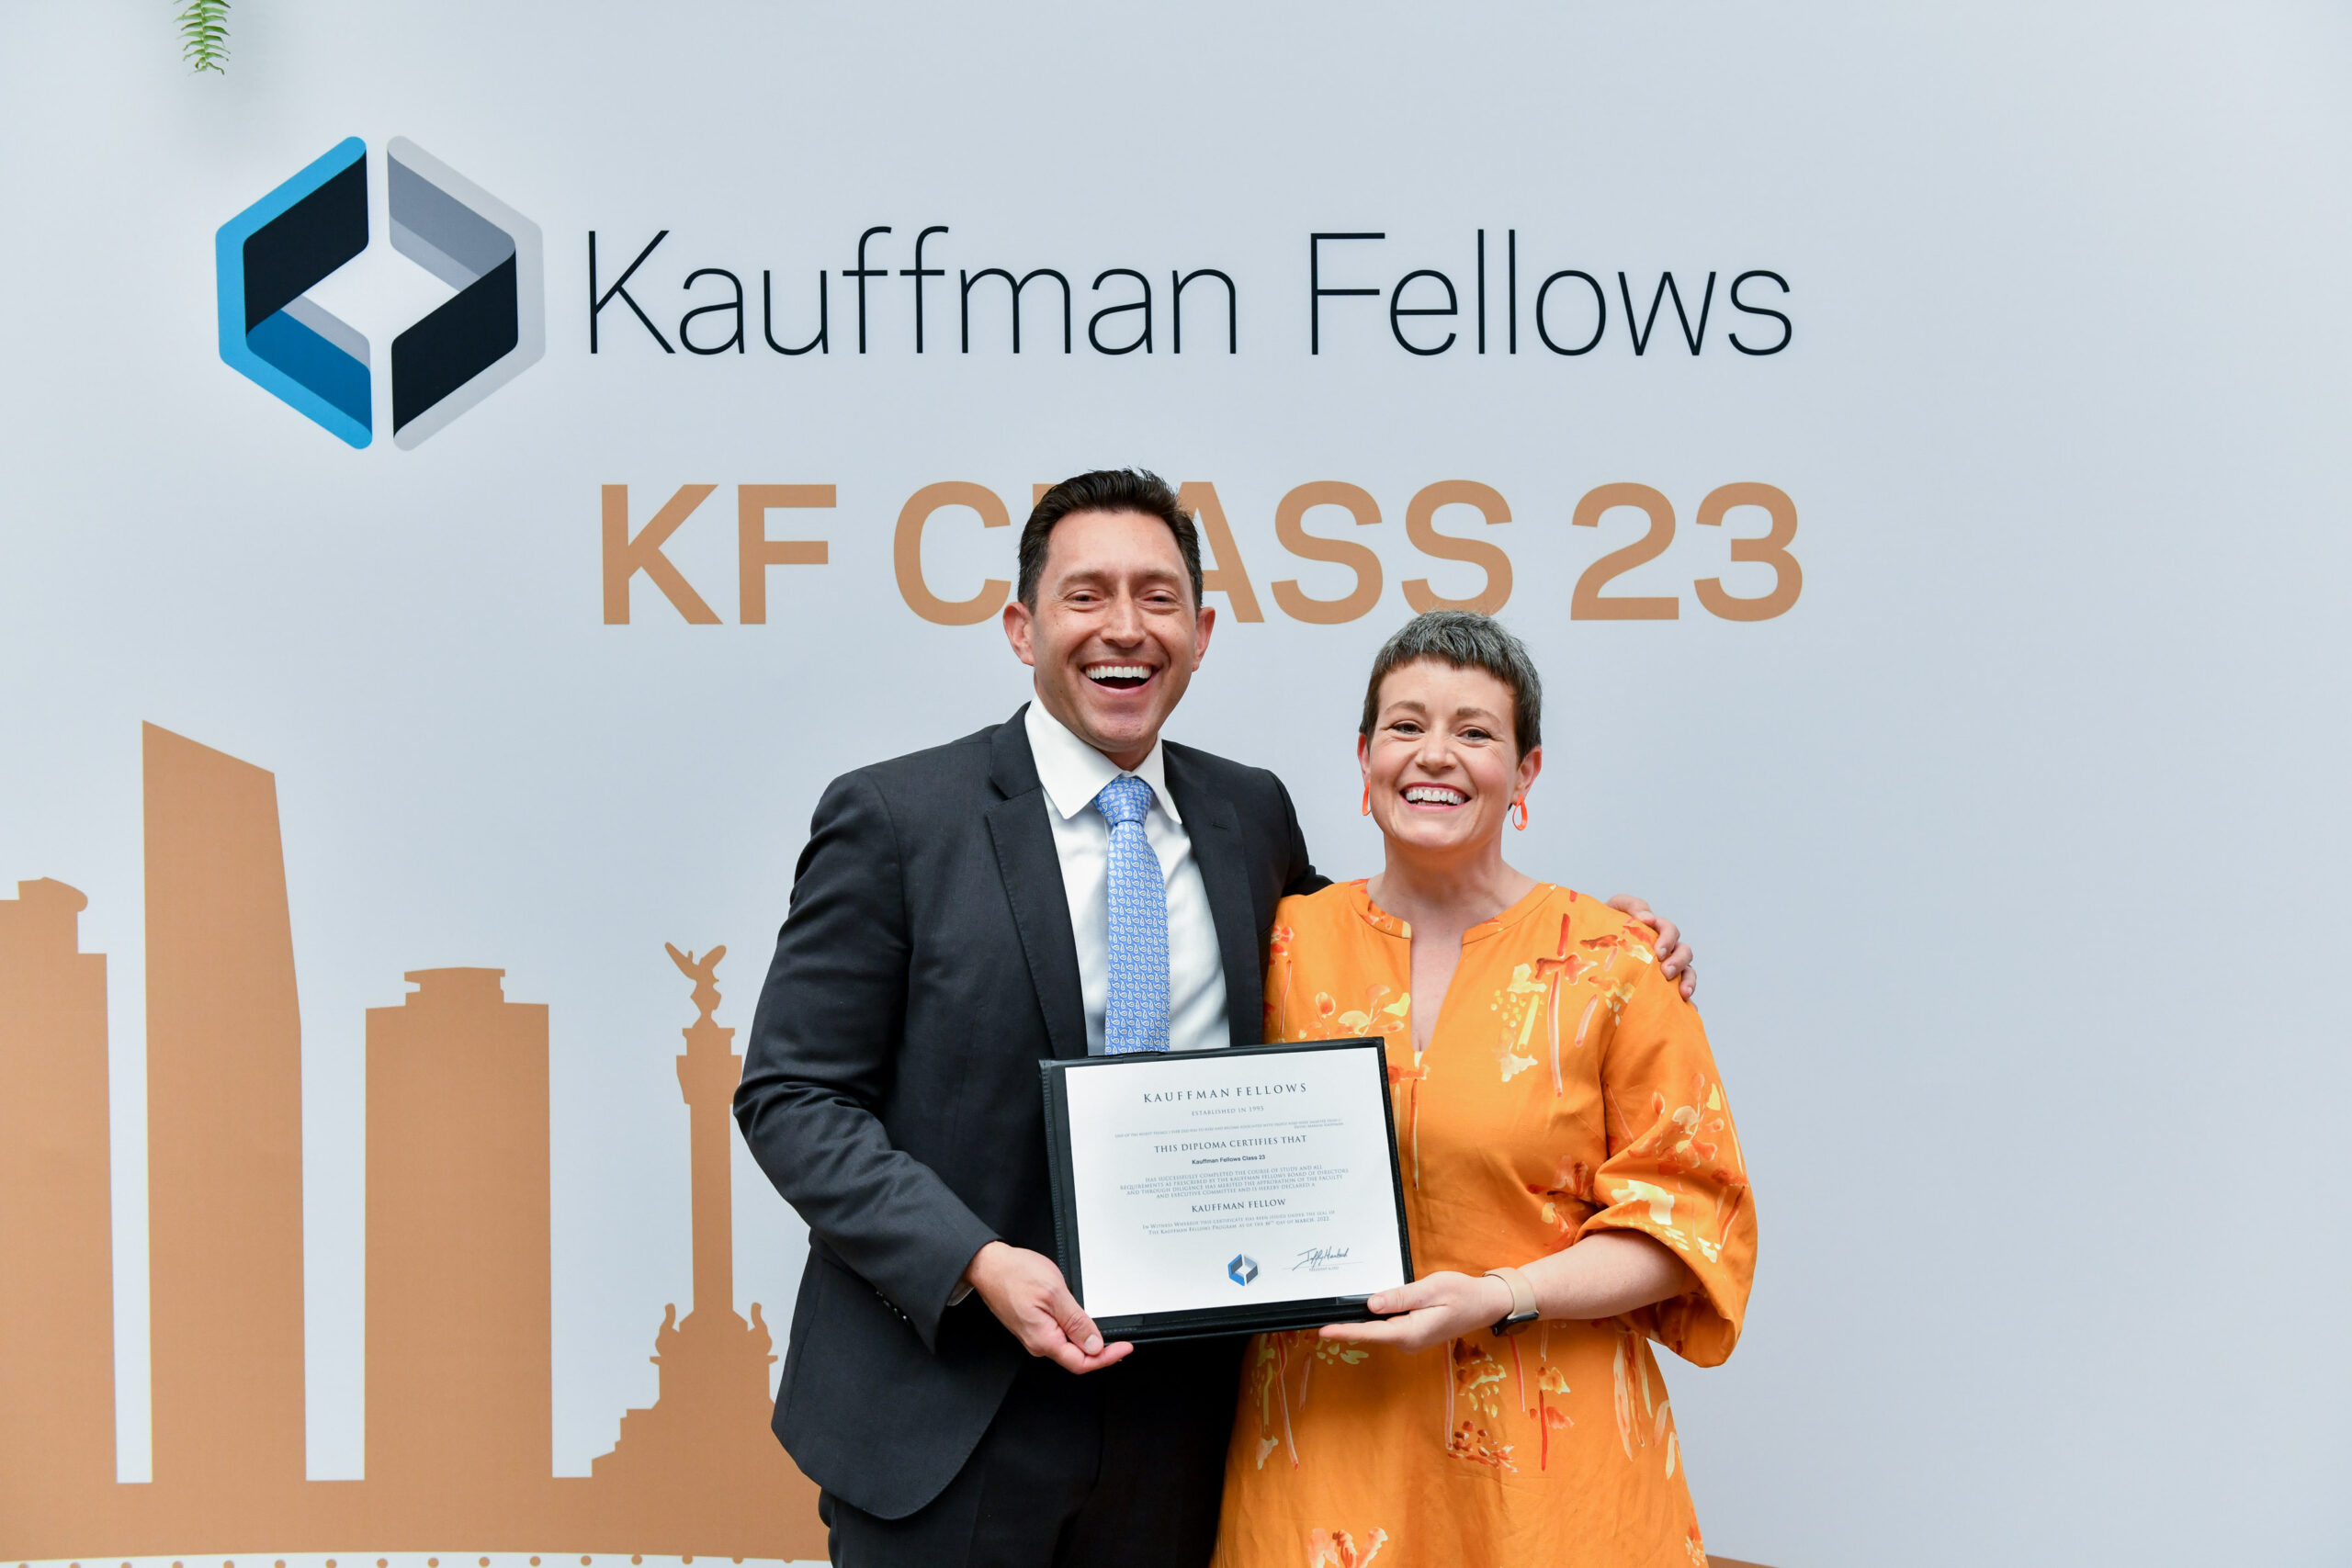 Should I apply to the Kauffman Fellows Program? A Personal Note